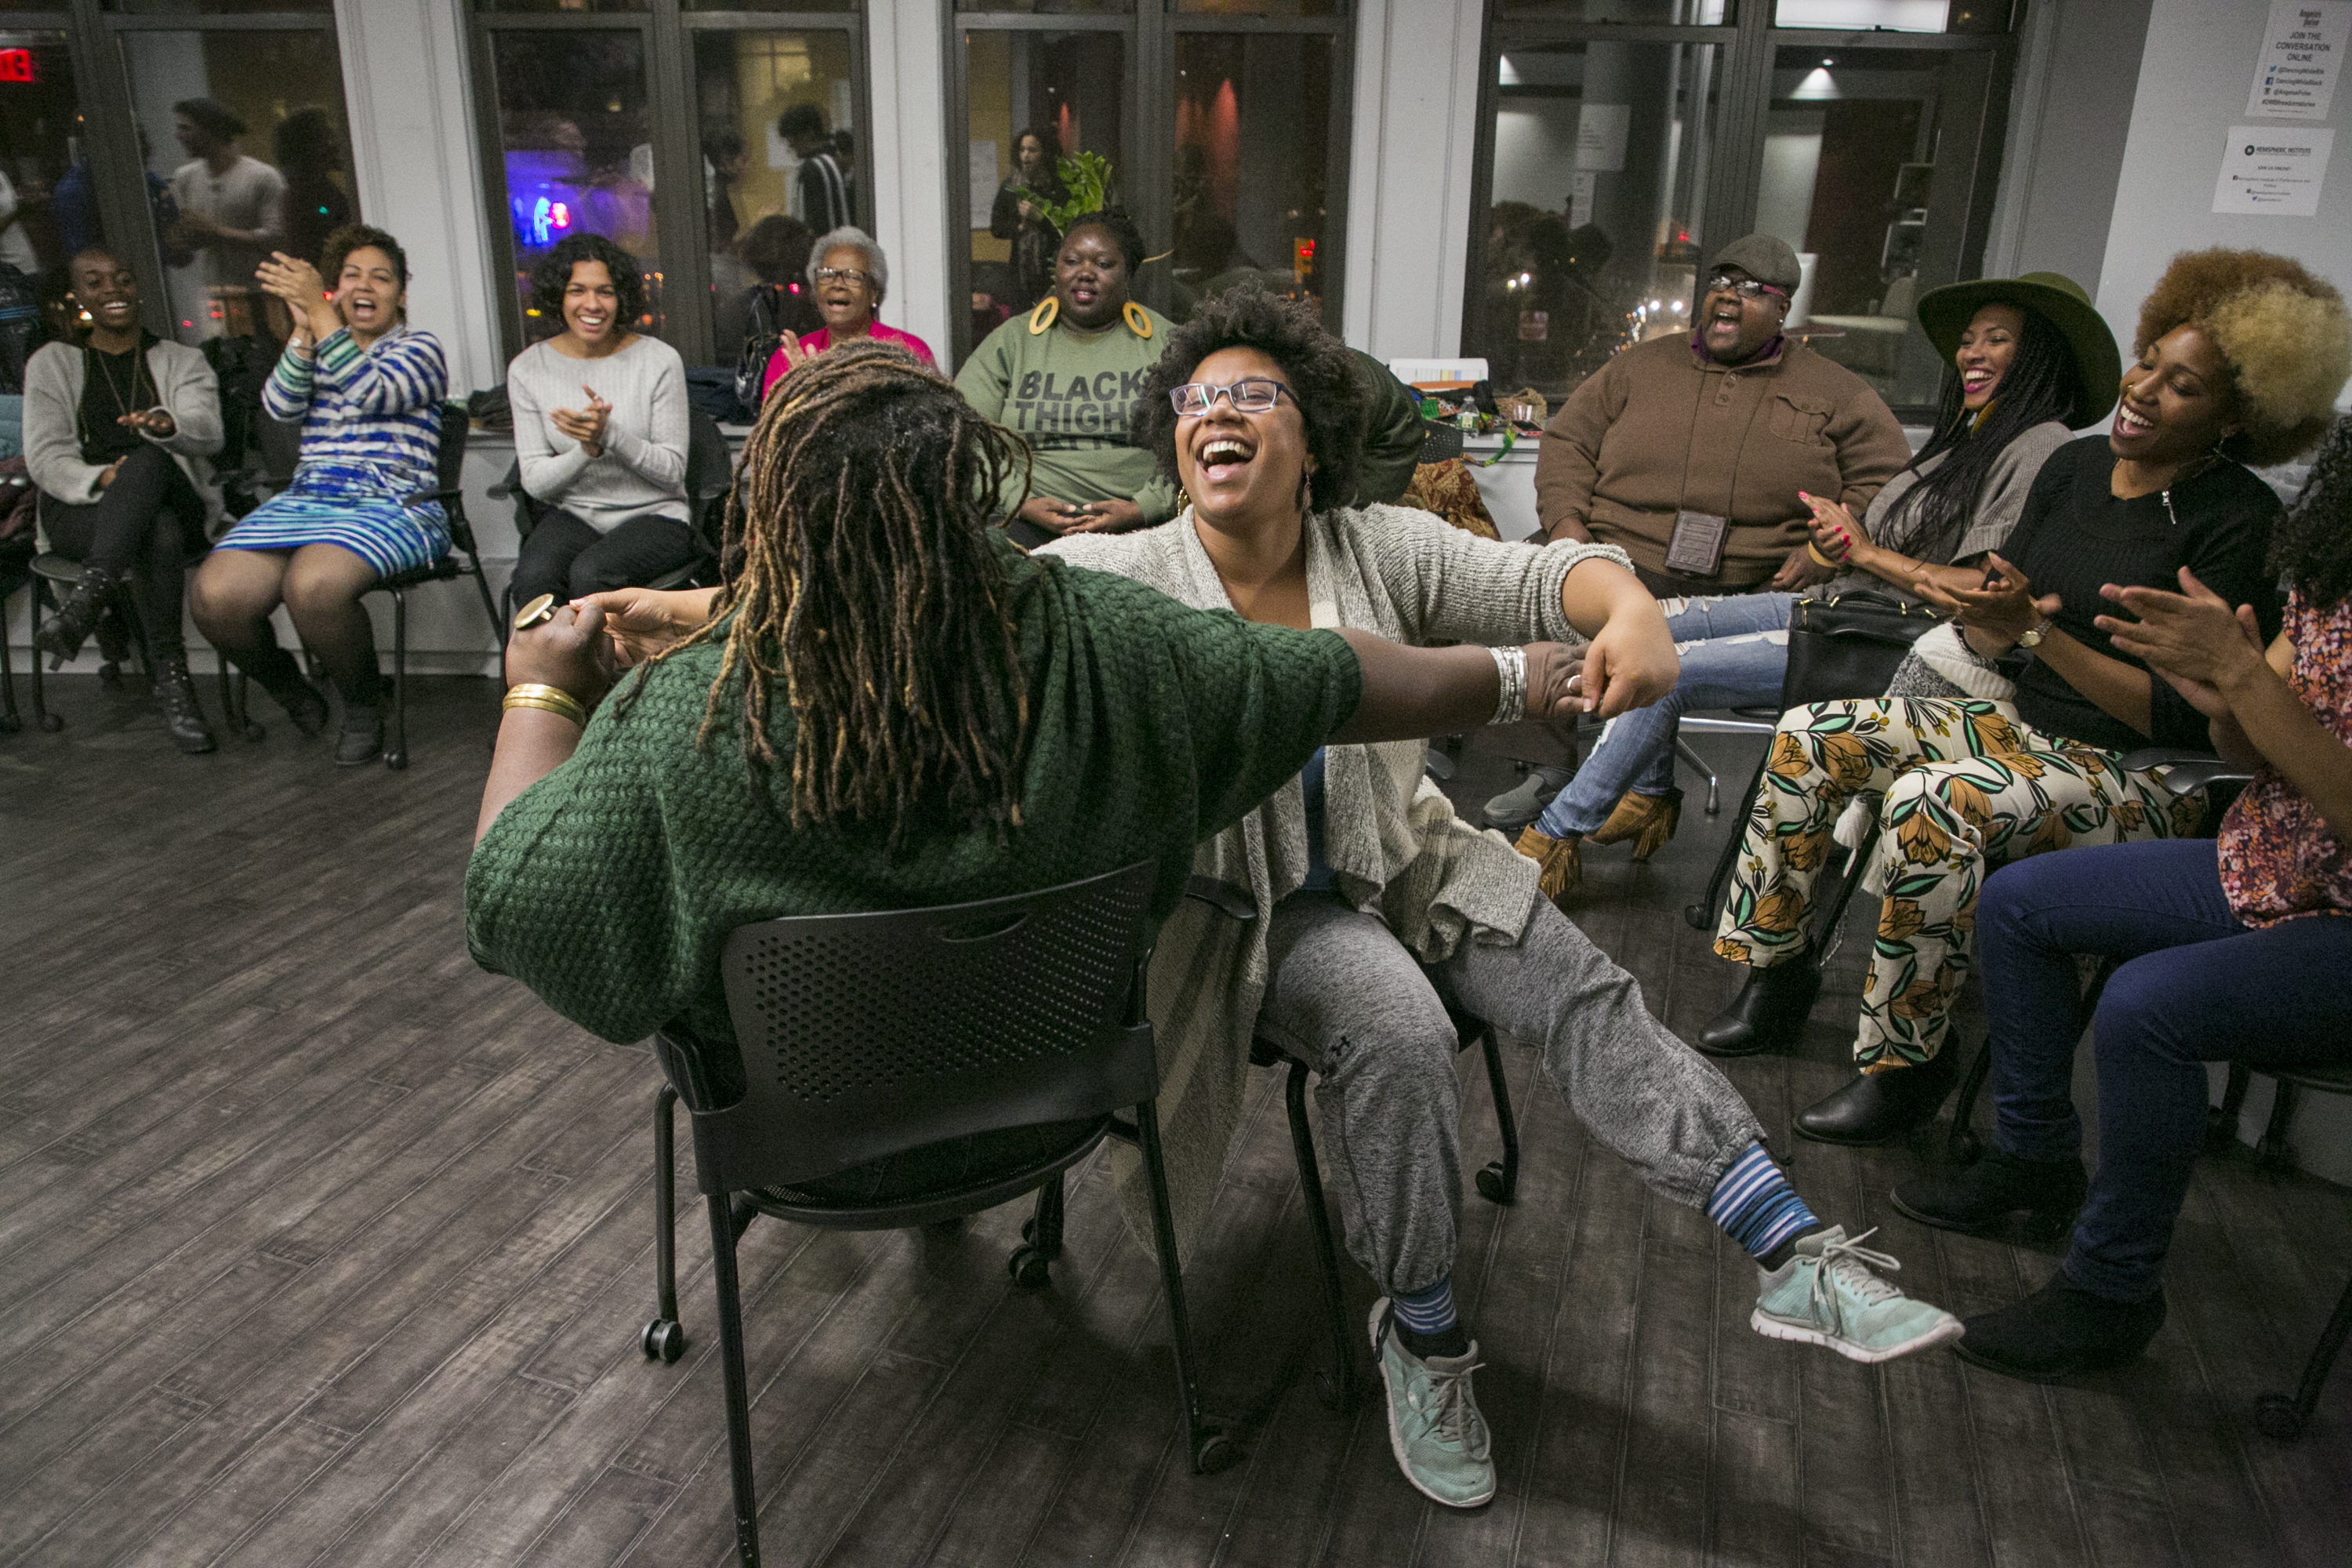 Ebony Noelle Golden and Sydnie L. Mosley ('15-'16 DWB Fellow) share a moment of pure joy surrounded by a circle of Dancing While Black community members at Dancing While Black: This Body Knows Freedom - Story Circles on Organizing toward Vision in an Age of Resistance at NYU's Hemispheric Institute in November 2017.